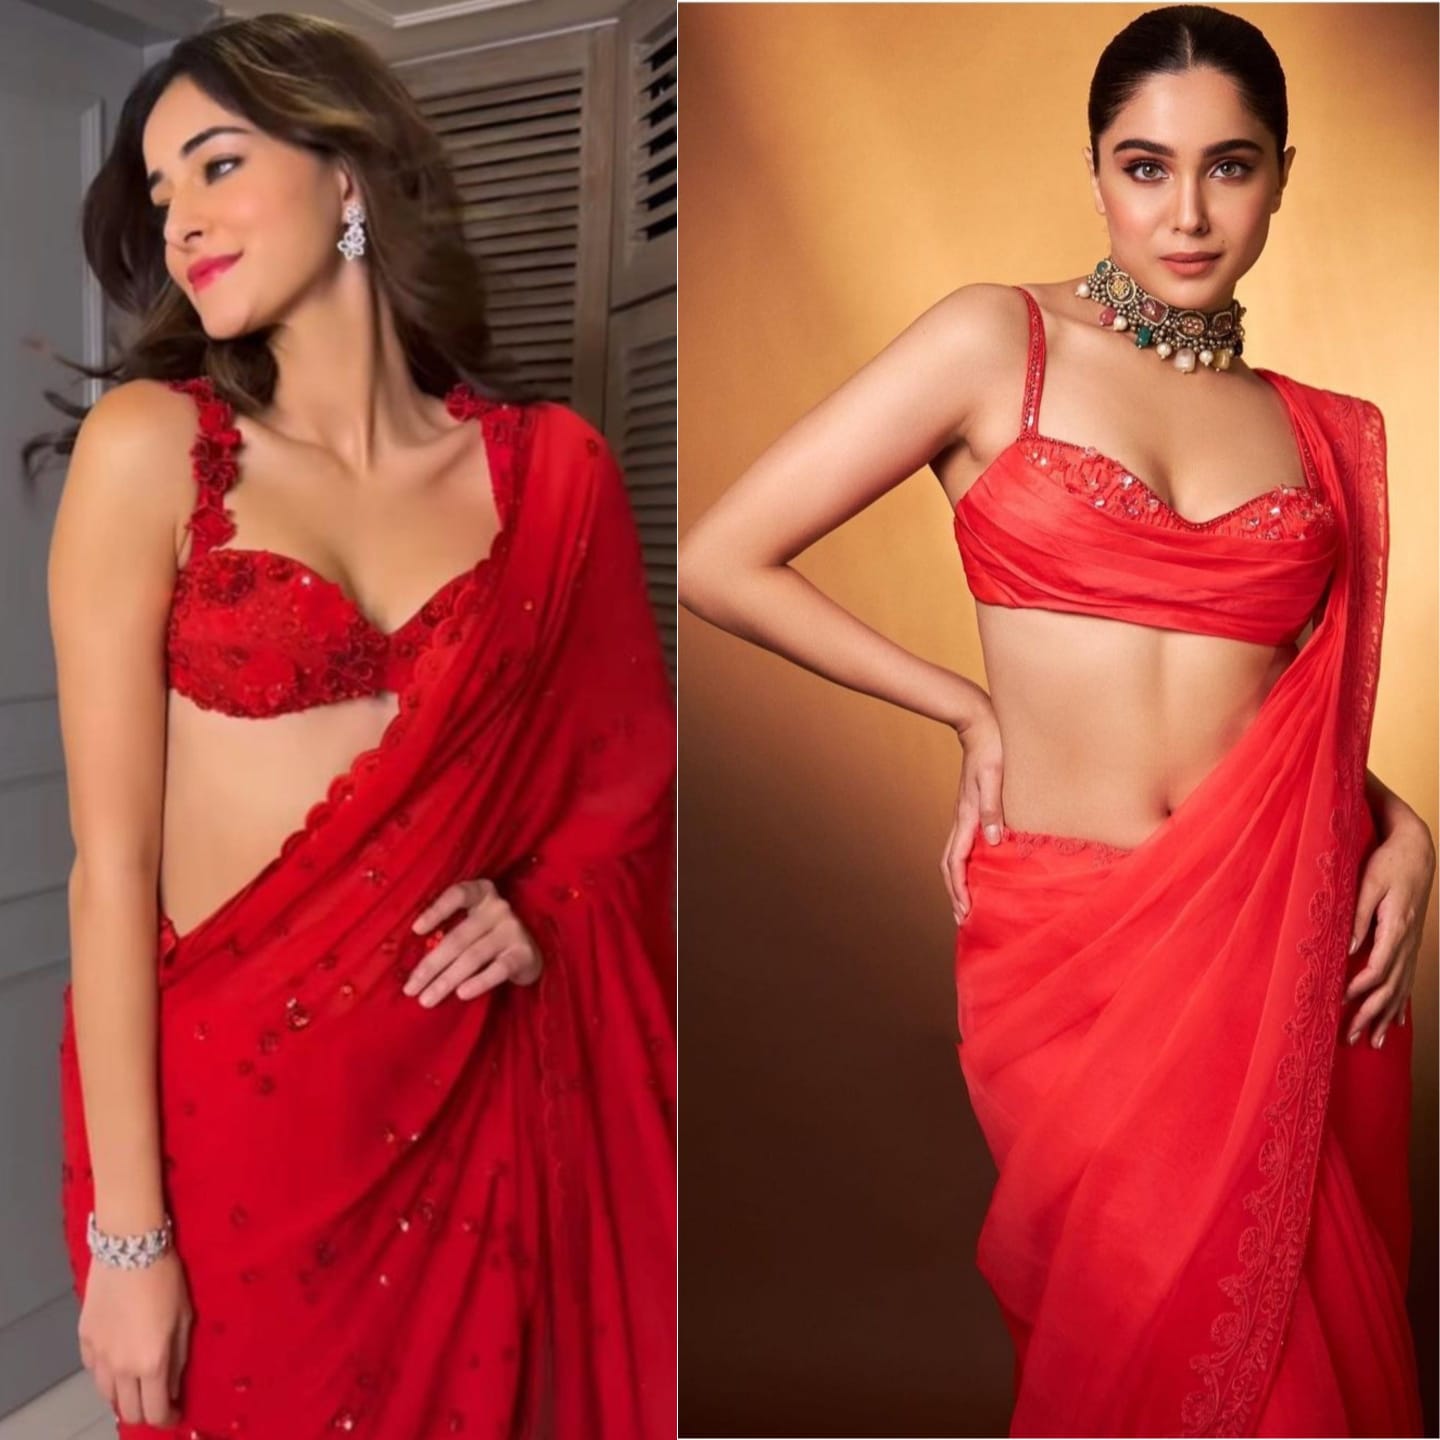 Ananya Panday and Sharvari looked feisty in red sarees